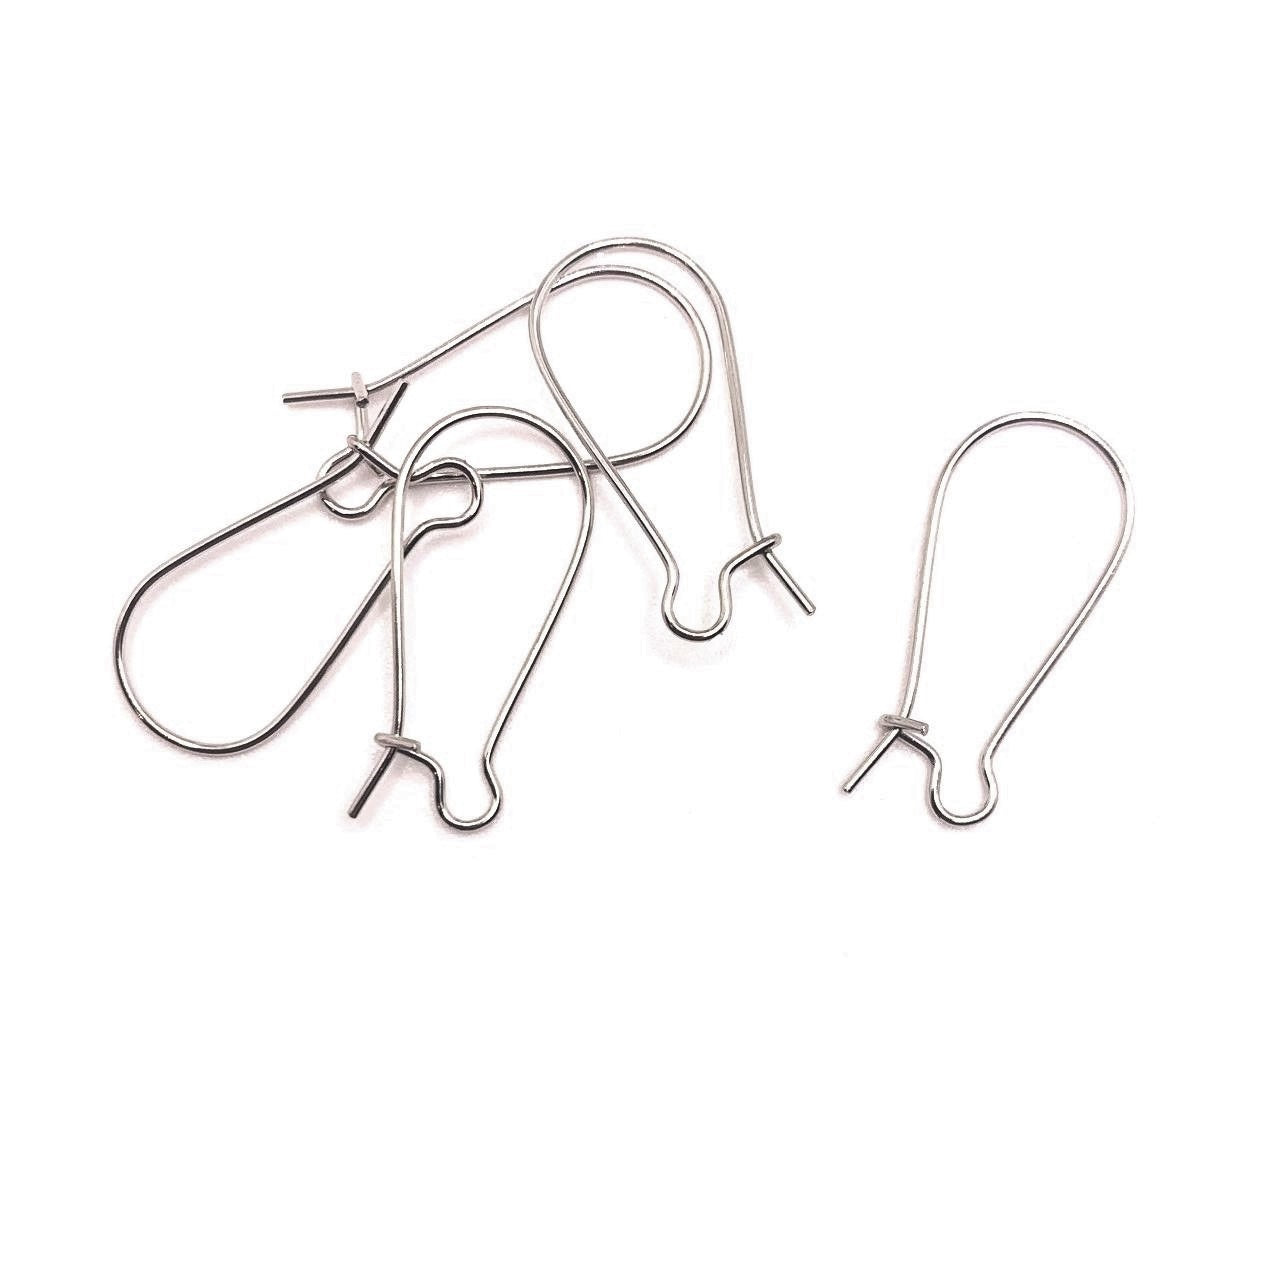 100 or 500 Pieces: Rhodium Silver Kidney Earring Wires